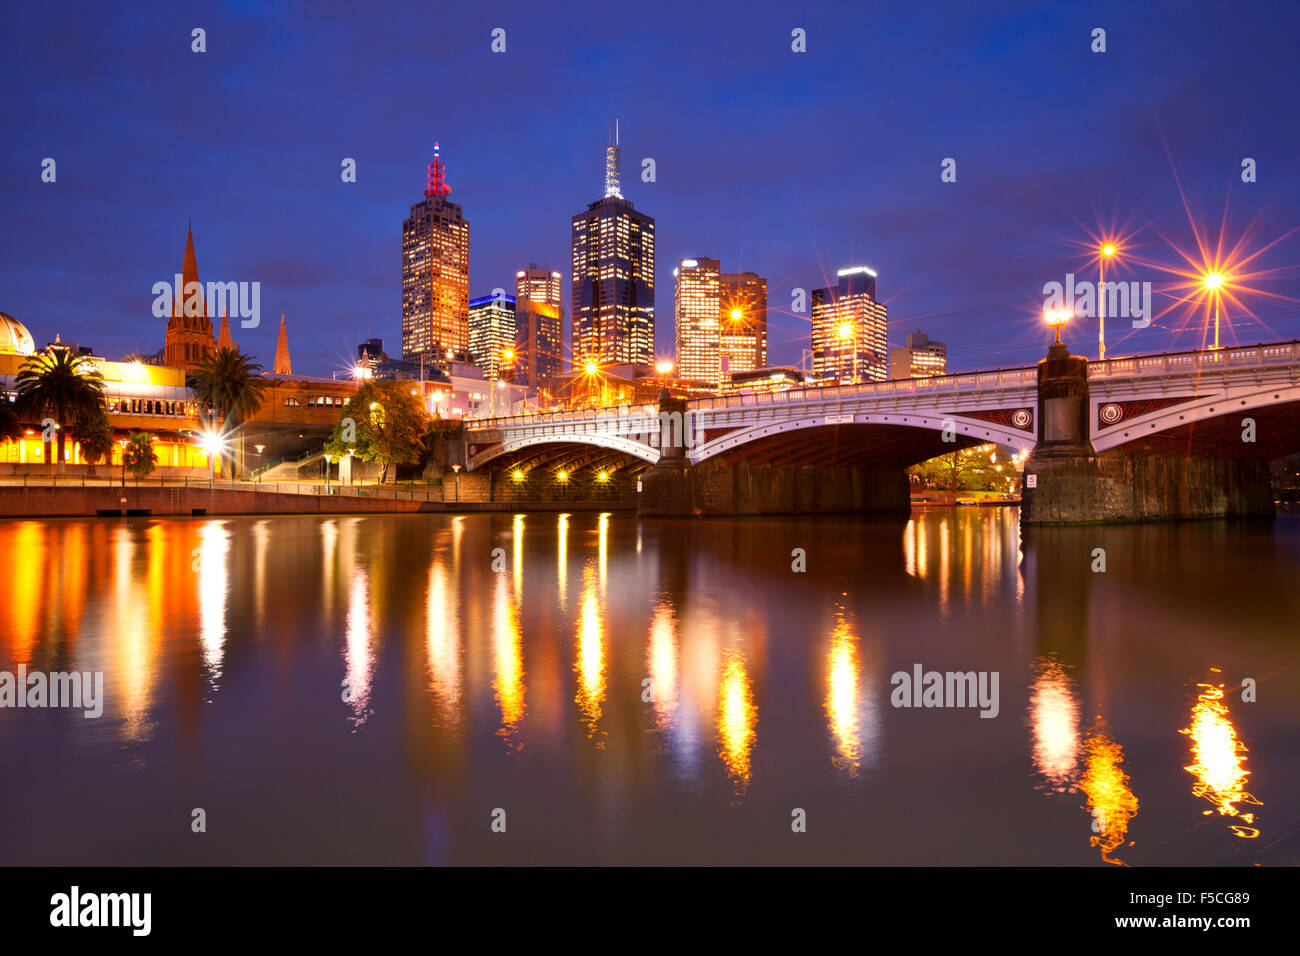 The skyline of Melbourne, Australia with Flinders Street Station and the Princes Bridge from across the Yarra River at night. Stock Photo